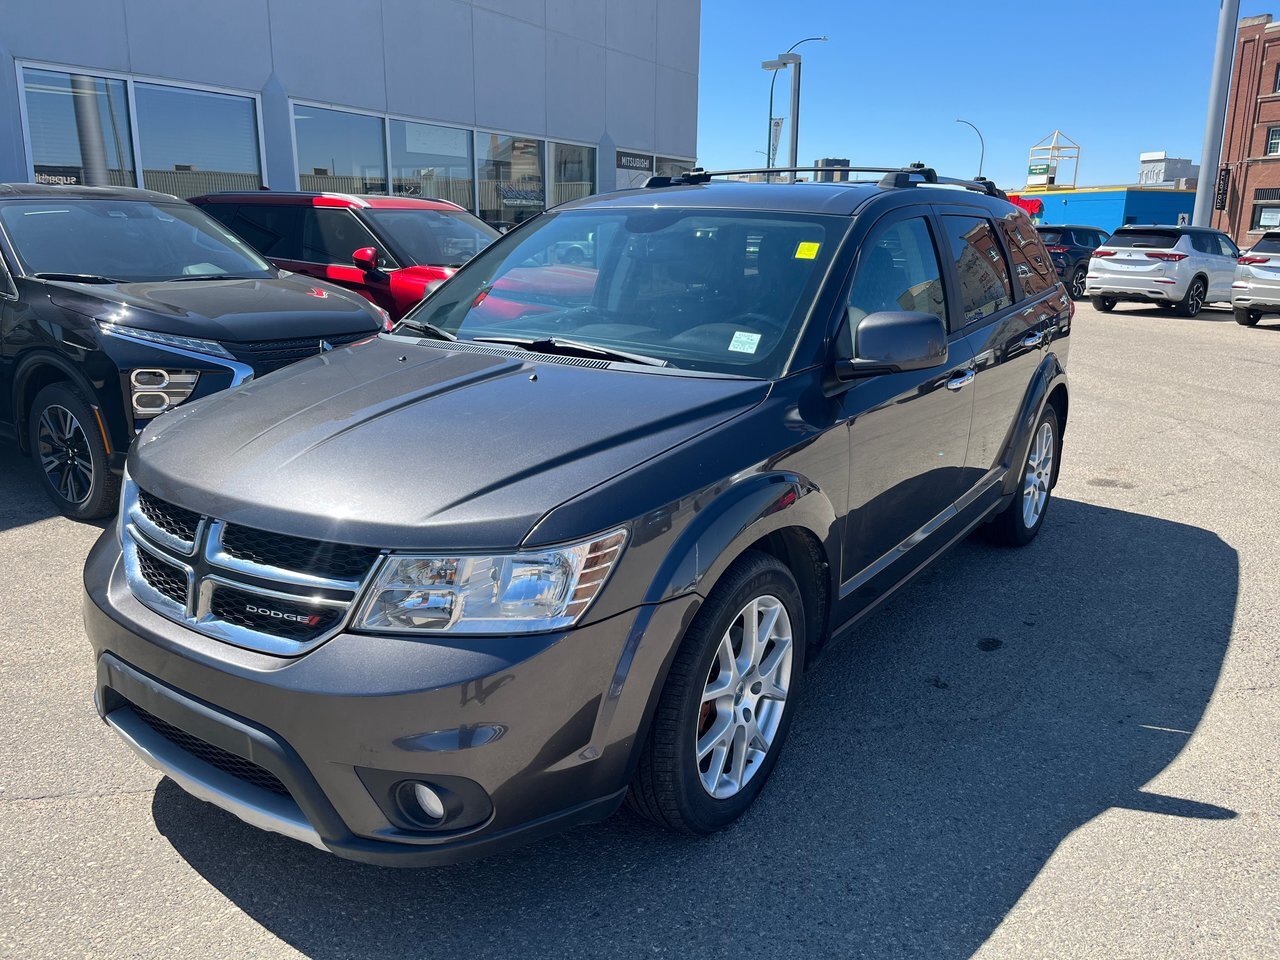 2016 Dodge Journey R/T AWD, Leather Interior, Heated Seats Local Trad